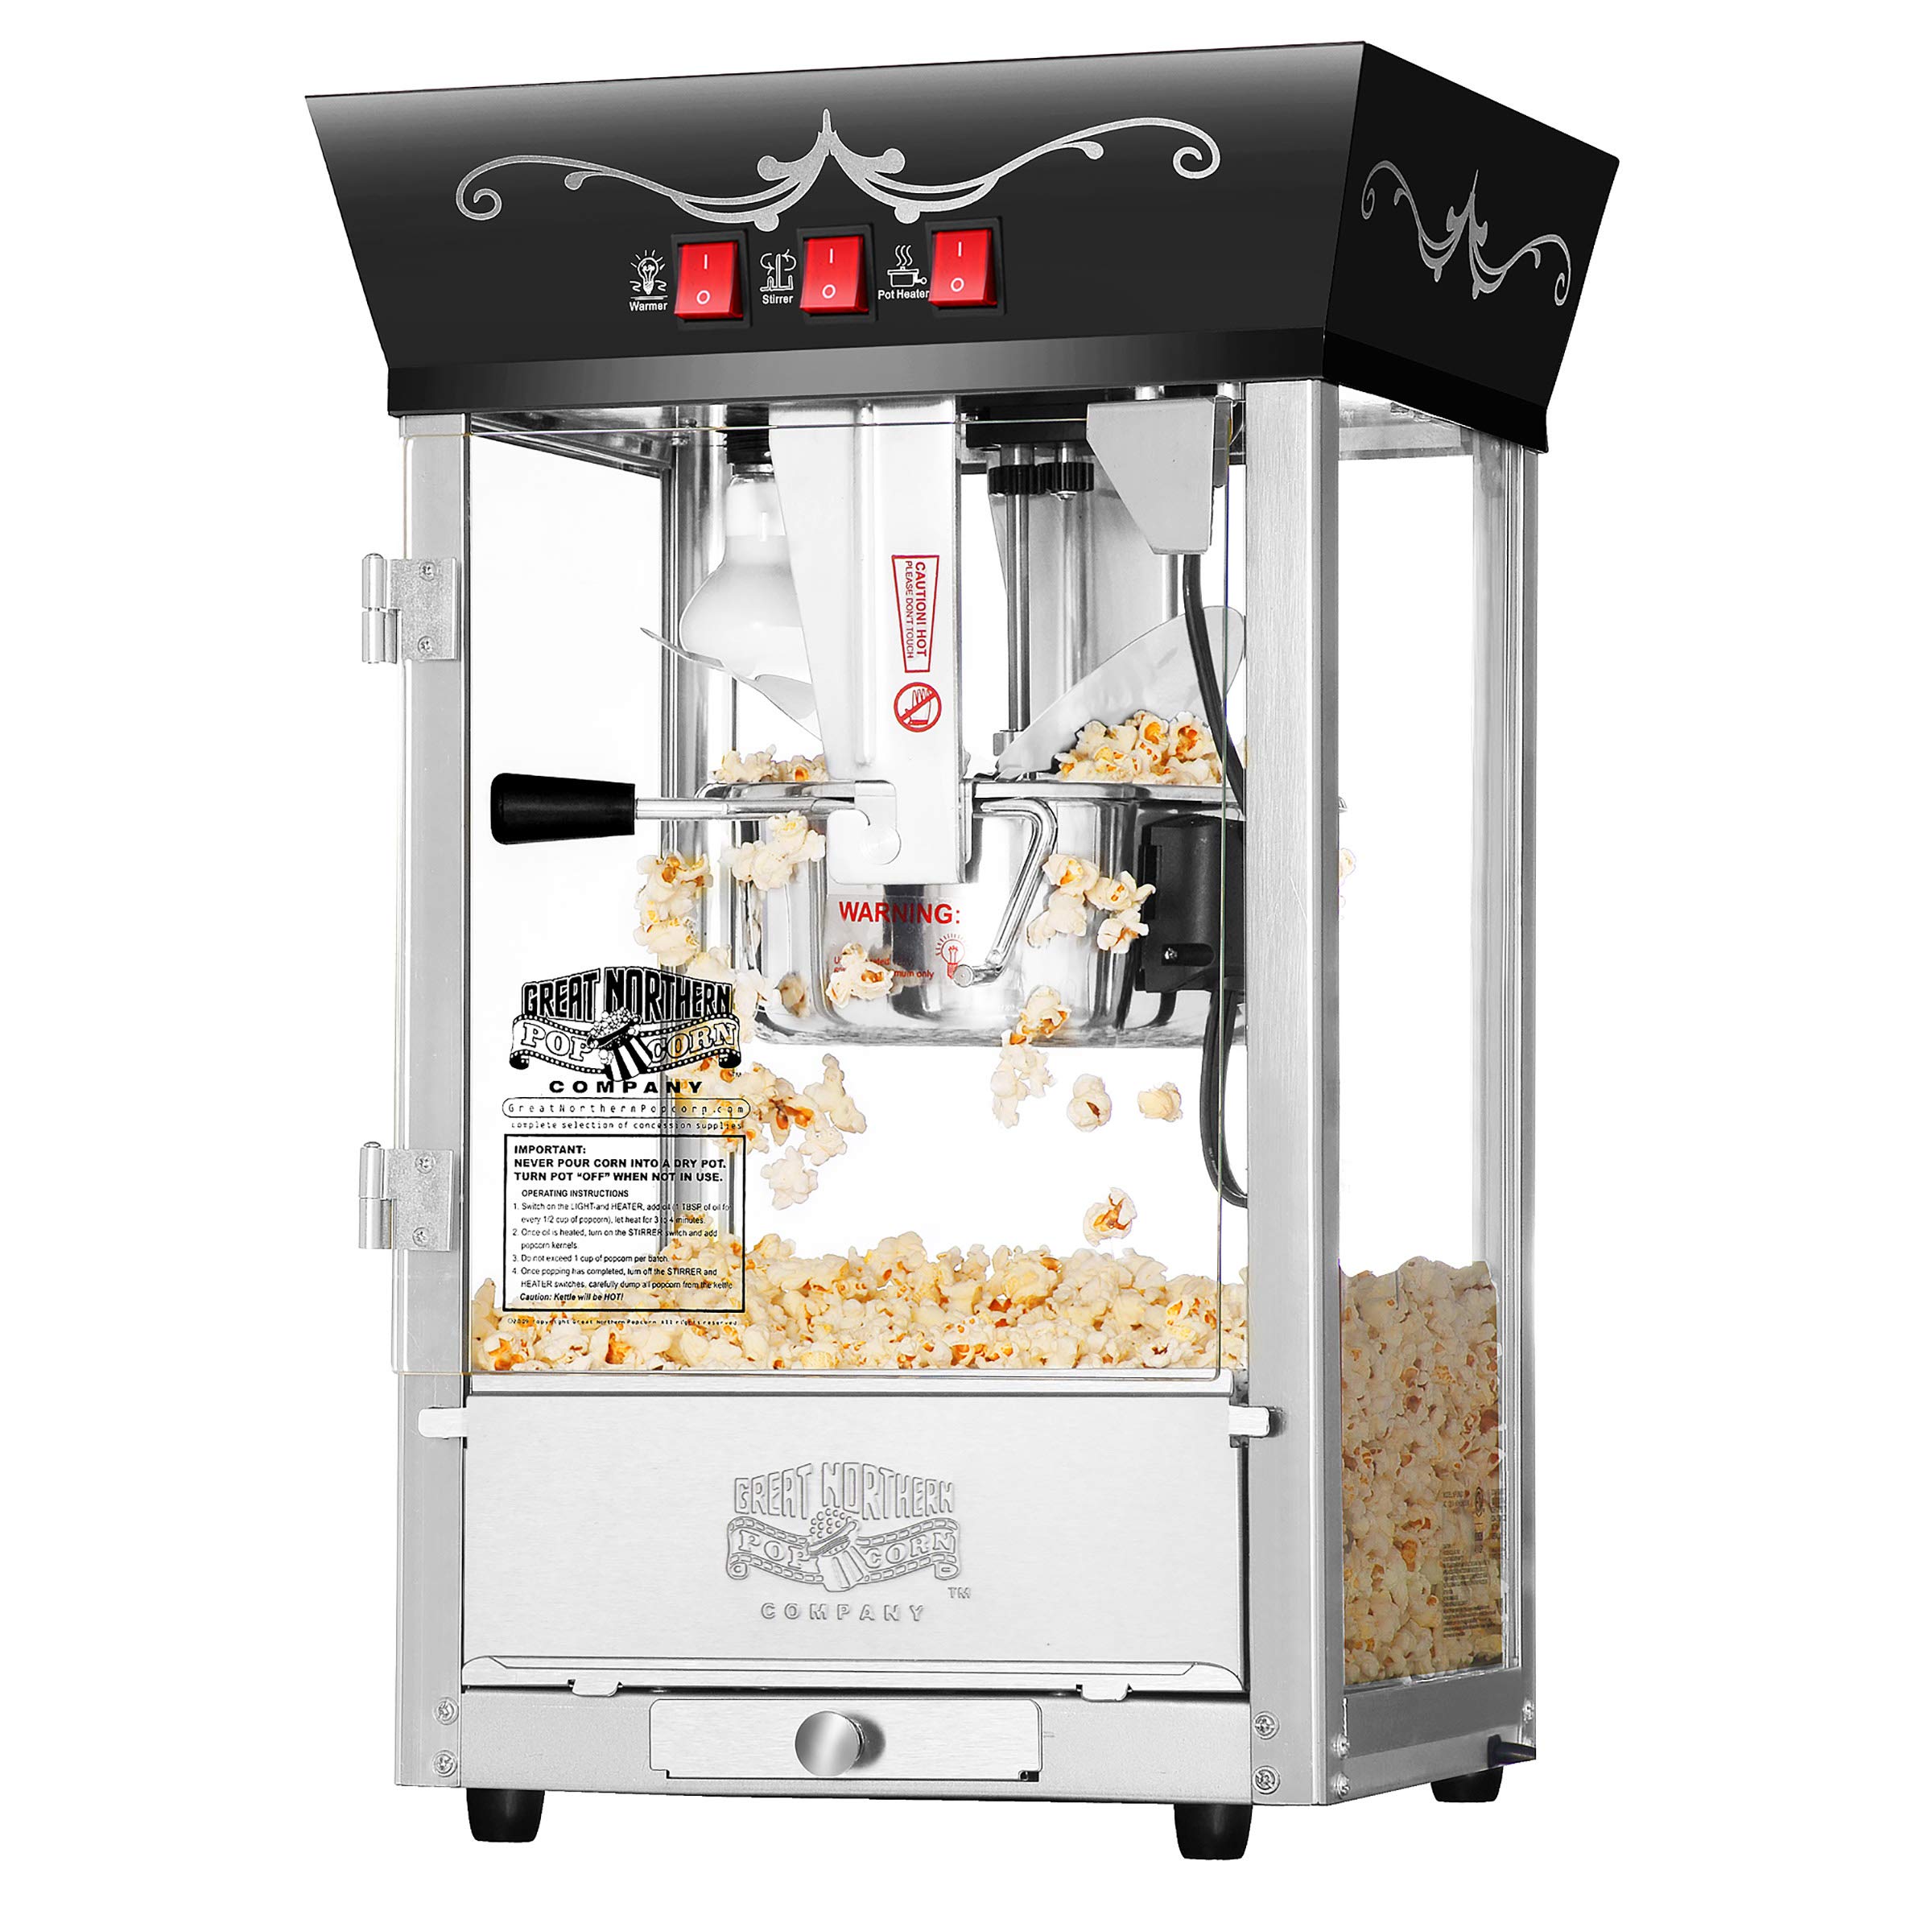 Matinee Popcorn Machine - 8oz Popper with Stainless-Steel Kettle, Reject Kernel Tray, Warming Light, and Accessories by Great Northern Popcorn (Black)